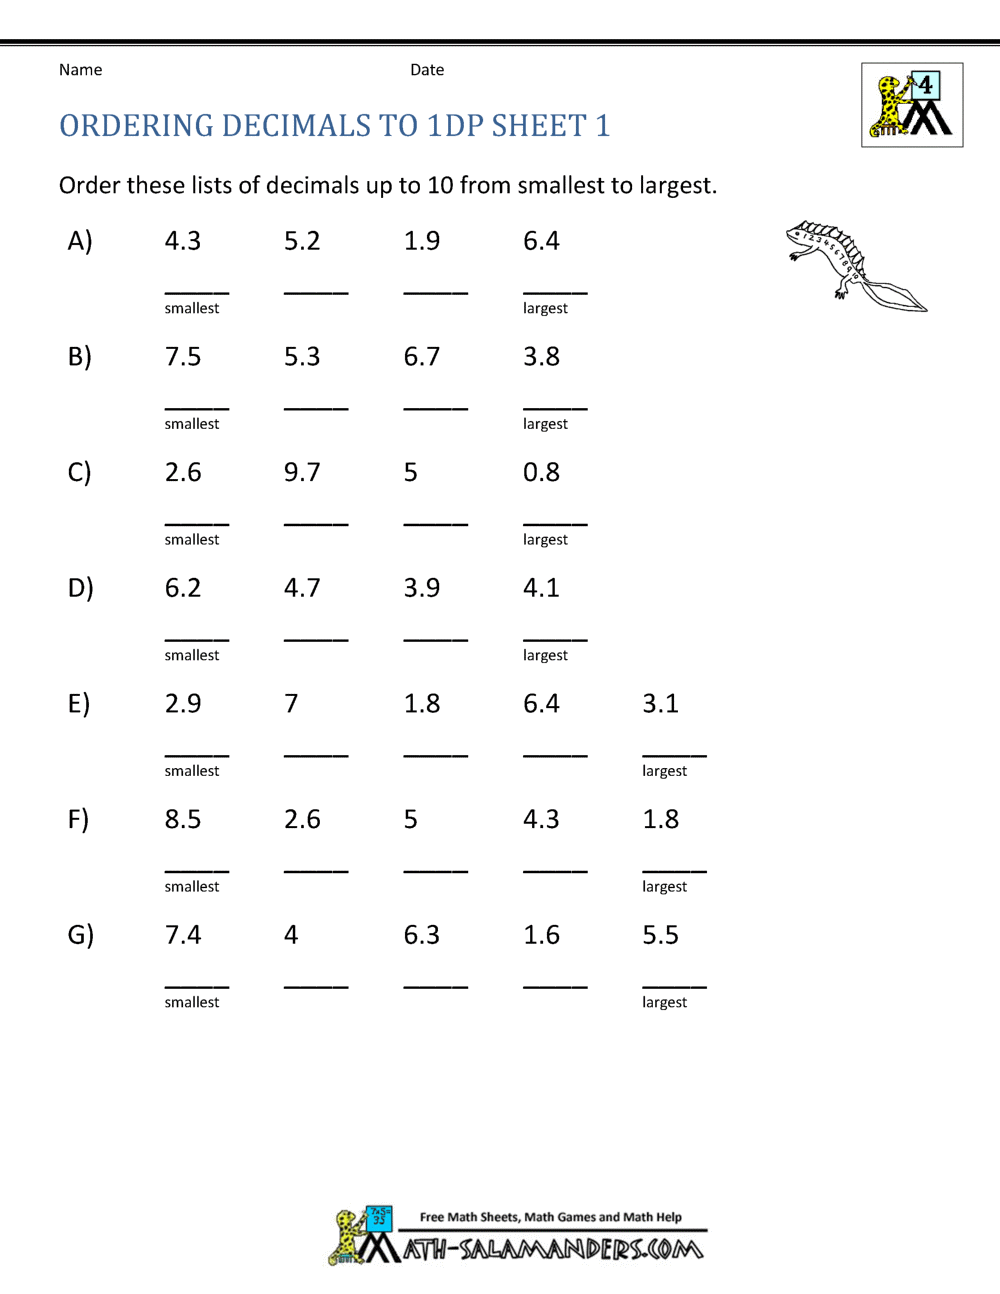 multiplication-word-problems-4th-grade